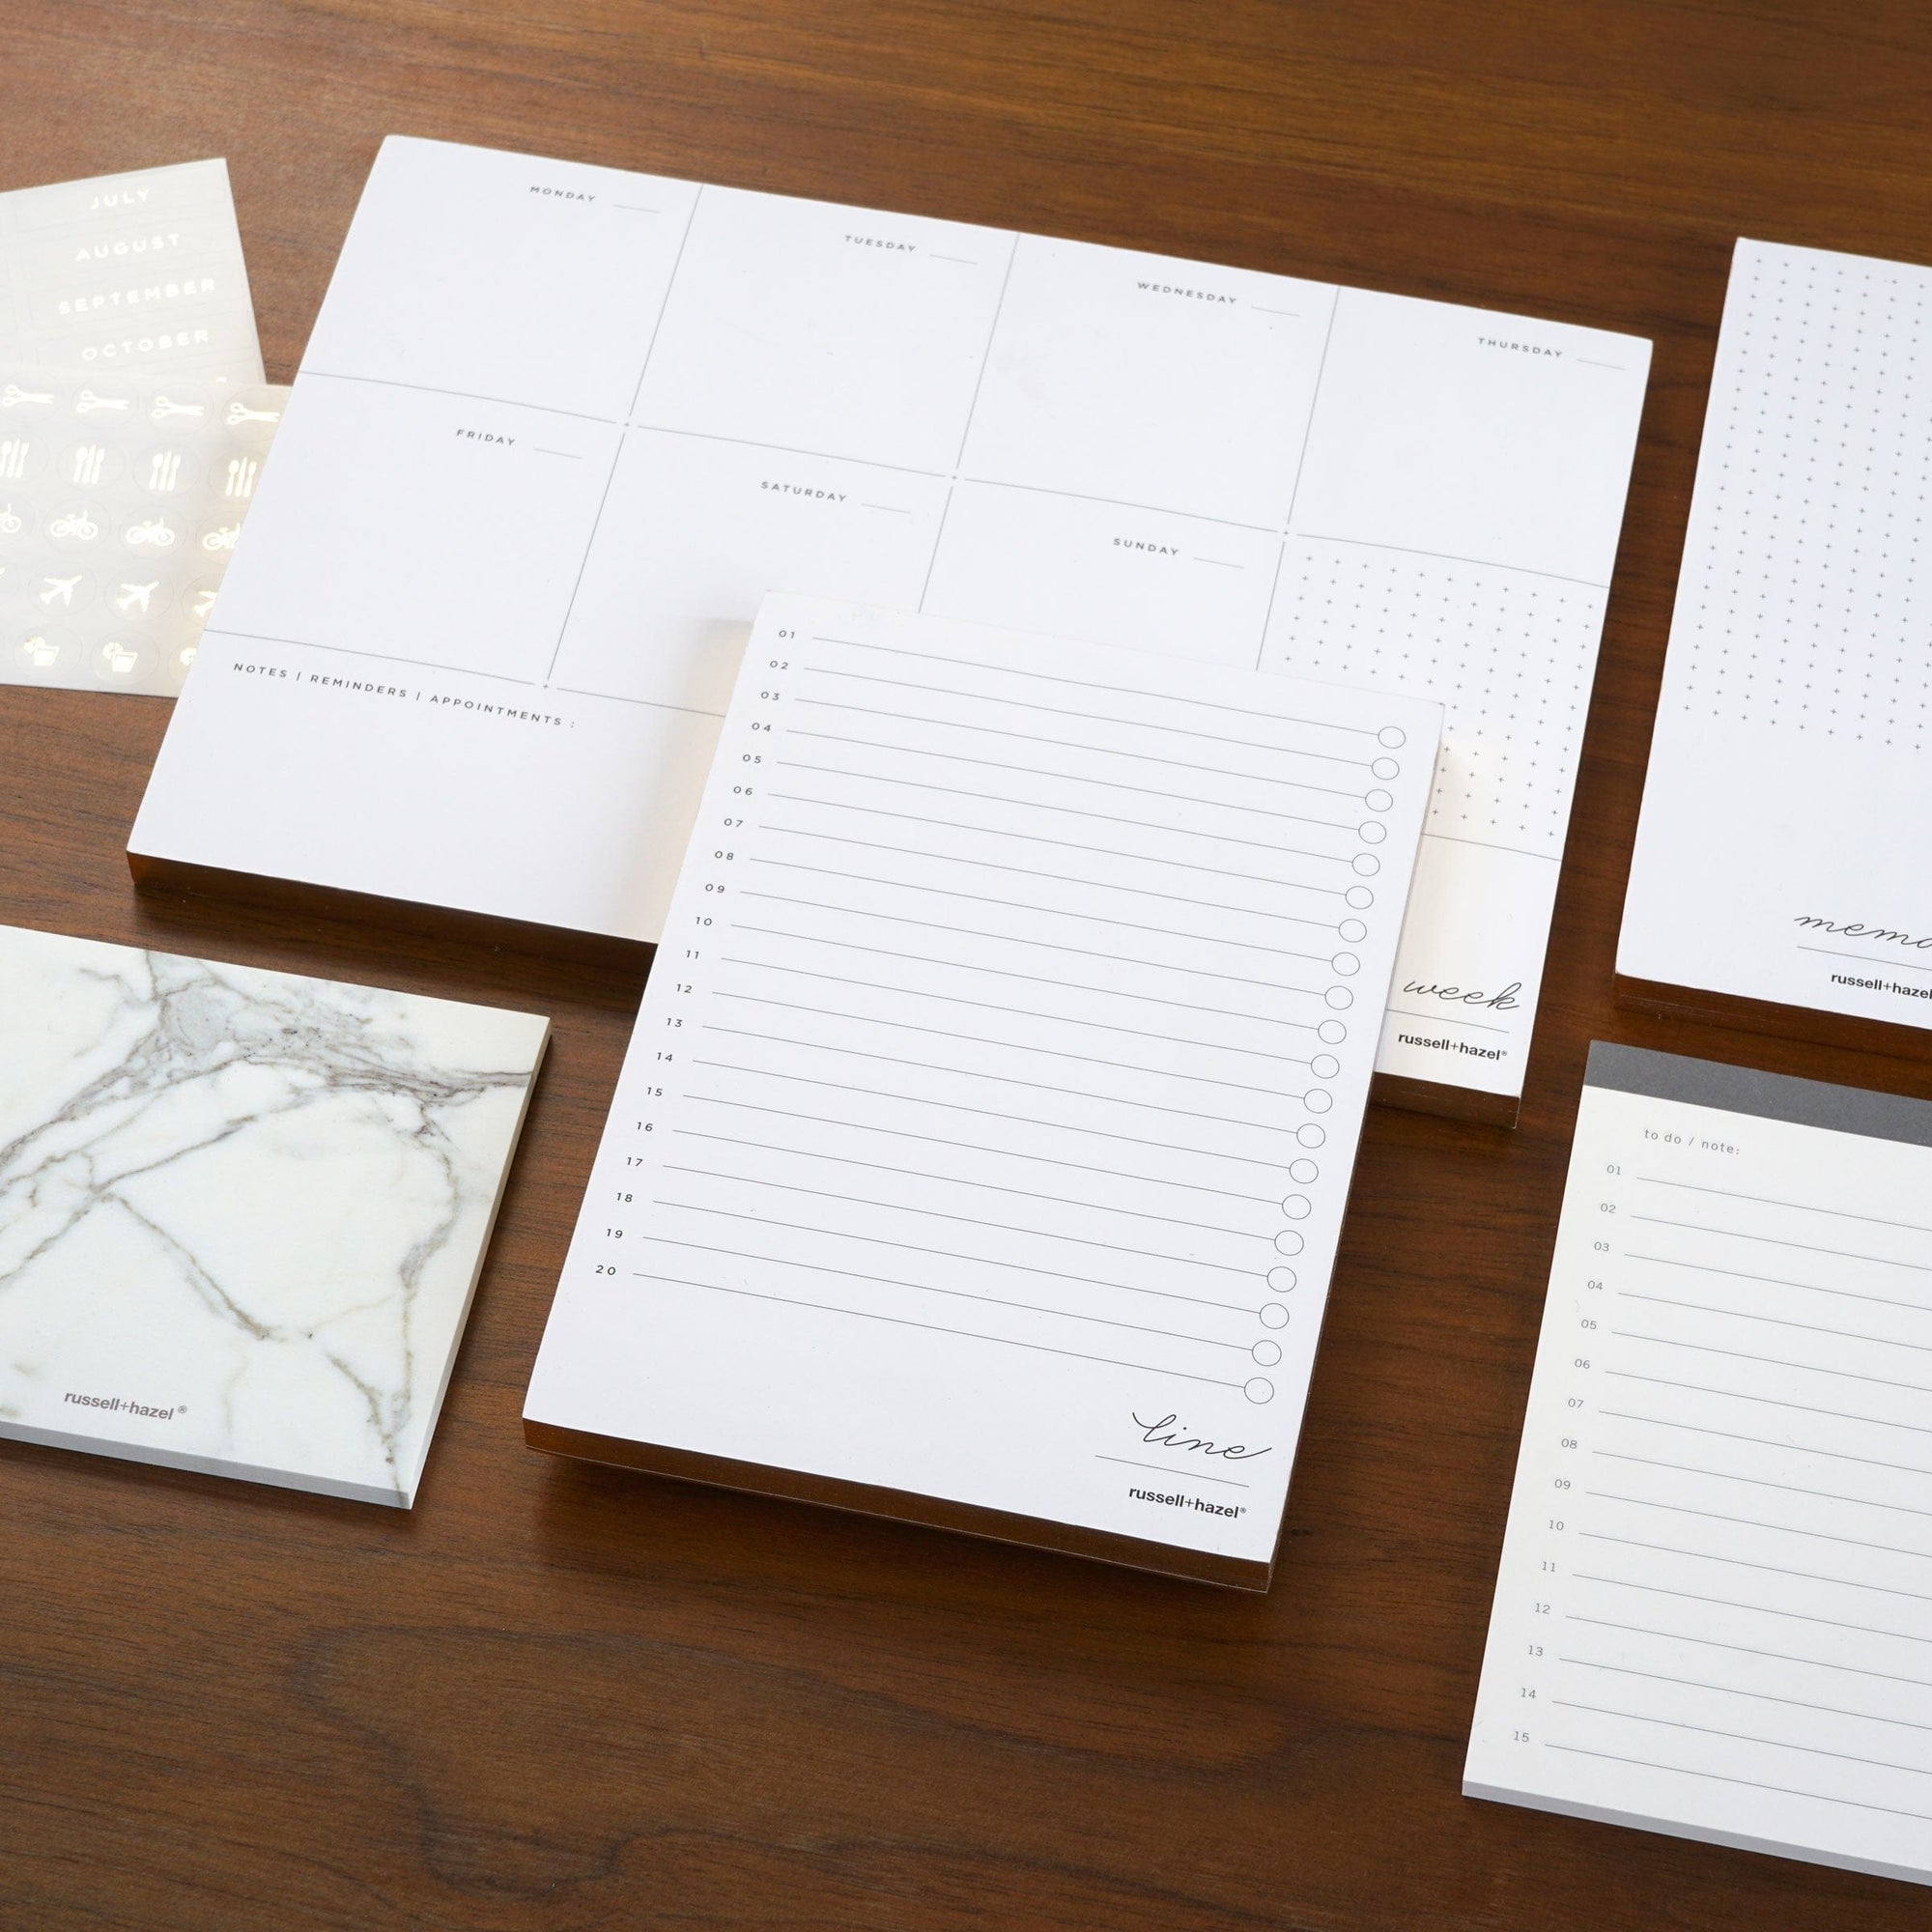 2024 A5 Daily Agenda in Cream Vegan Leather — The Astral Planner